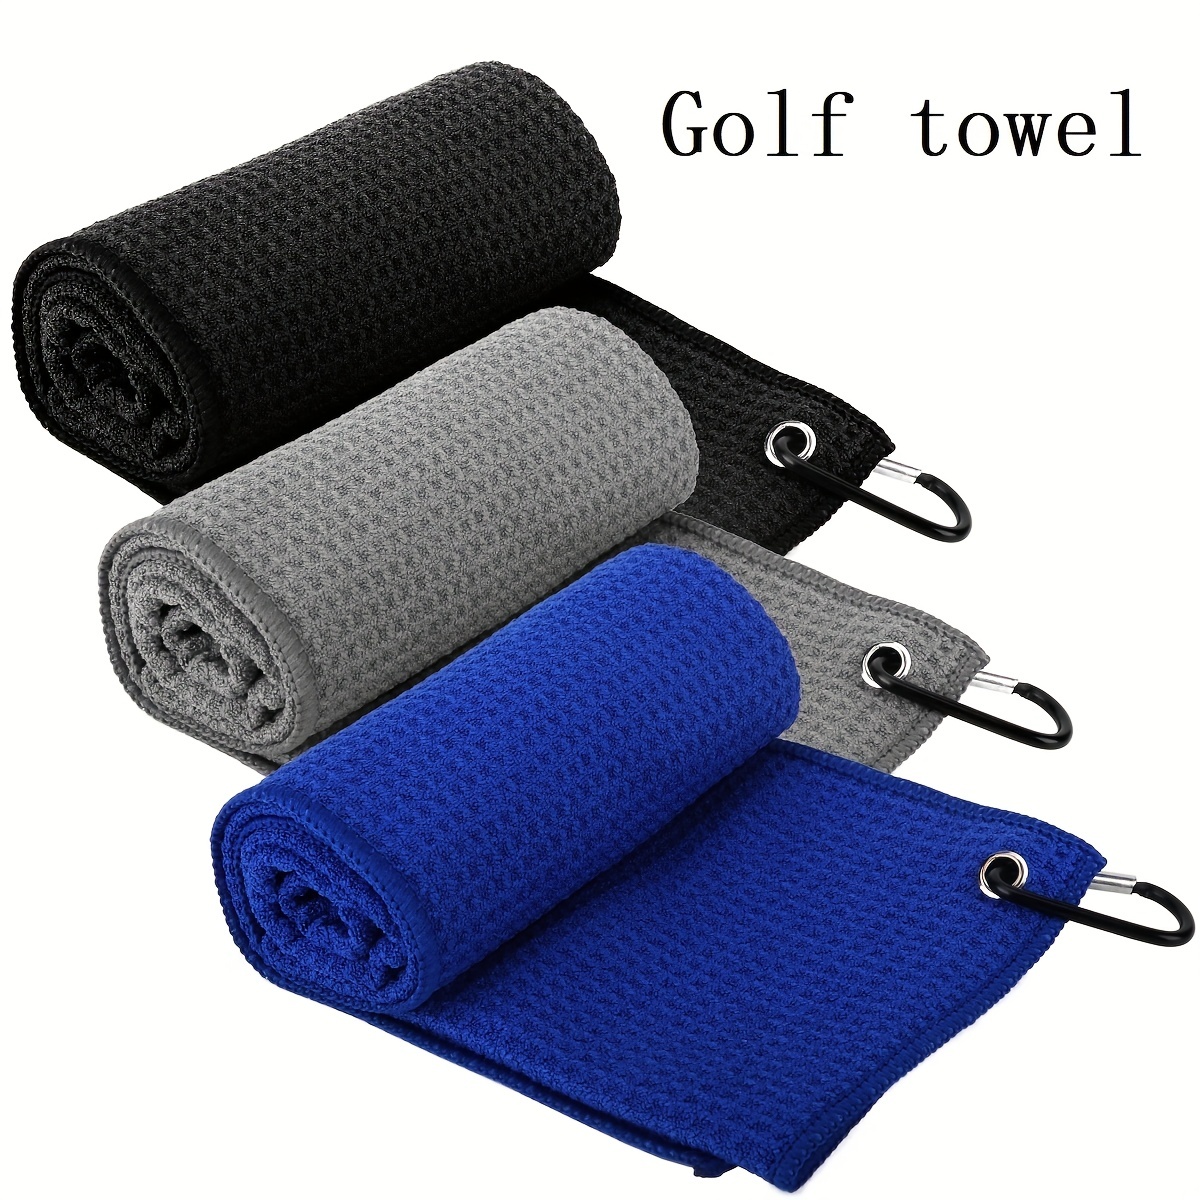 Play Ball - Baseball Glove and Ball Graphic Golf Towel with Carabiner Clip  